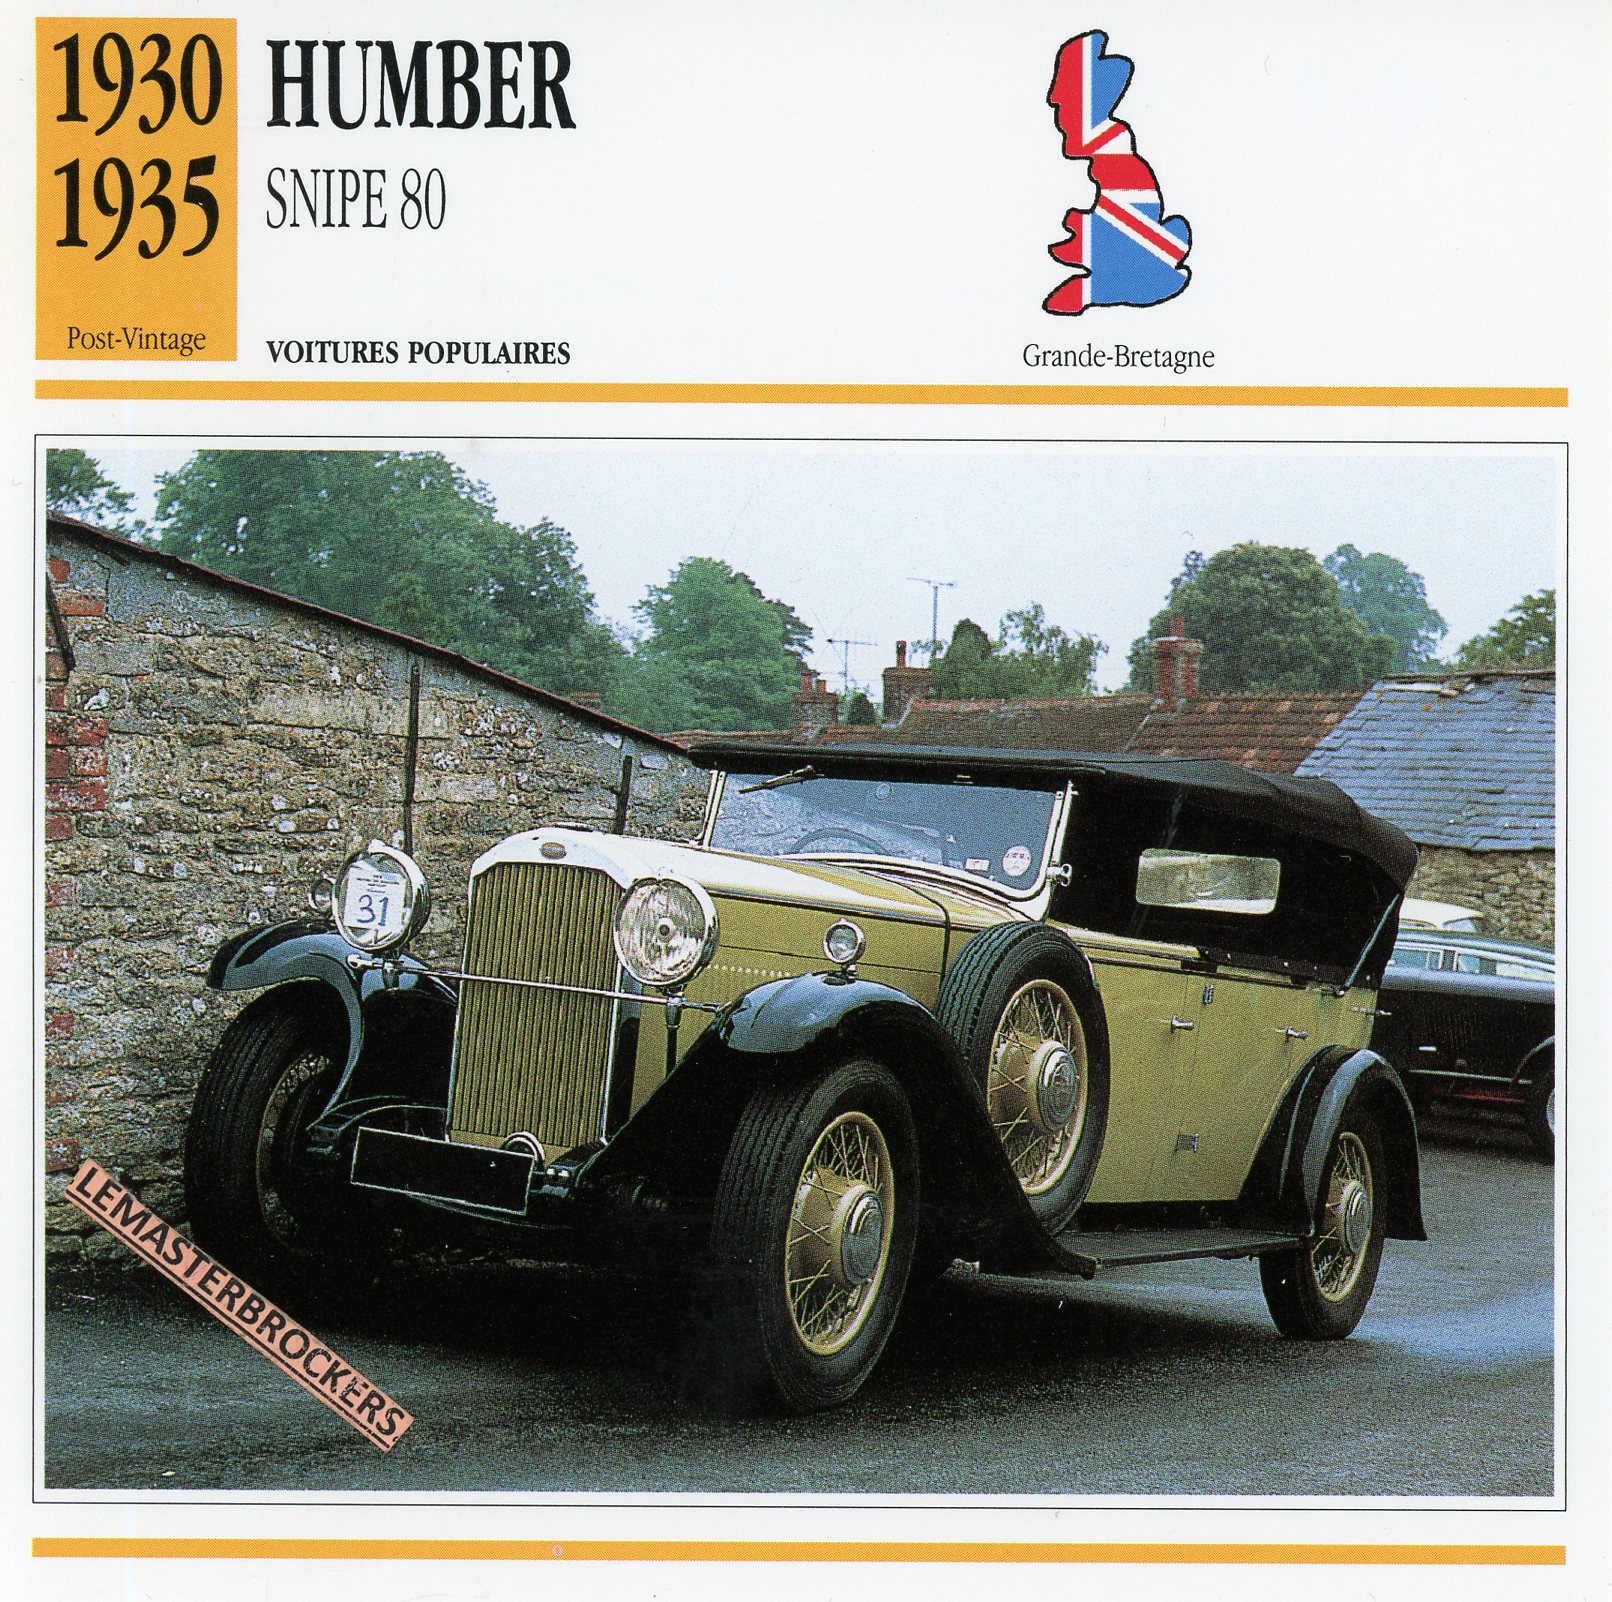 FICHE-AUTO-HUMBER-SNIPE-80-LEMASTERBROCKERS-CARD-CARS-ATLAS